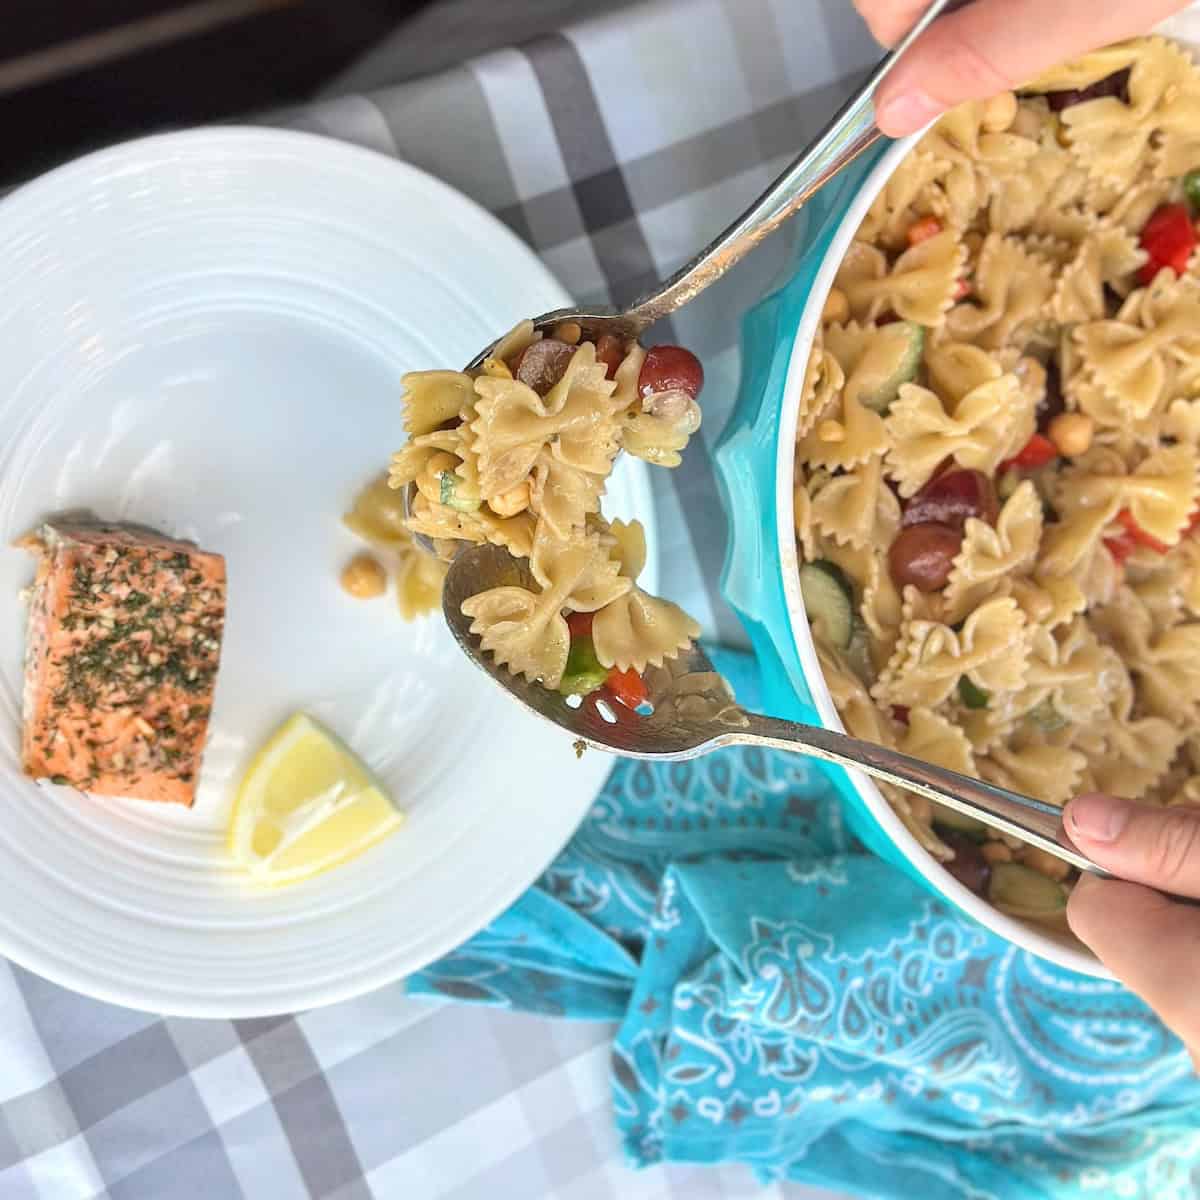 hands with silver spoons dishing pasta salad onto plate with salmon and lemon wedge